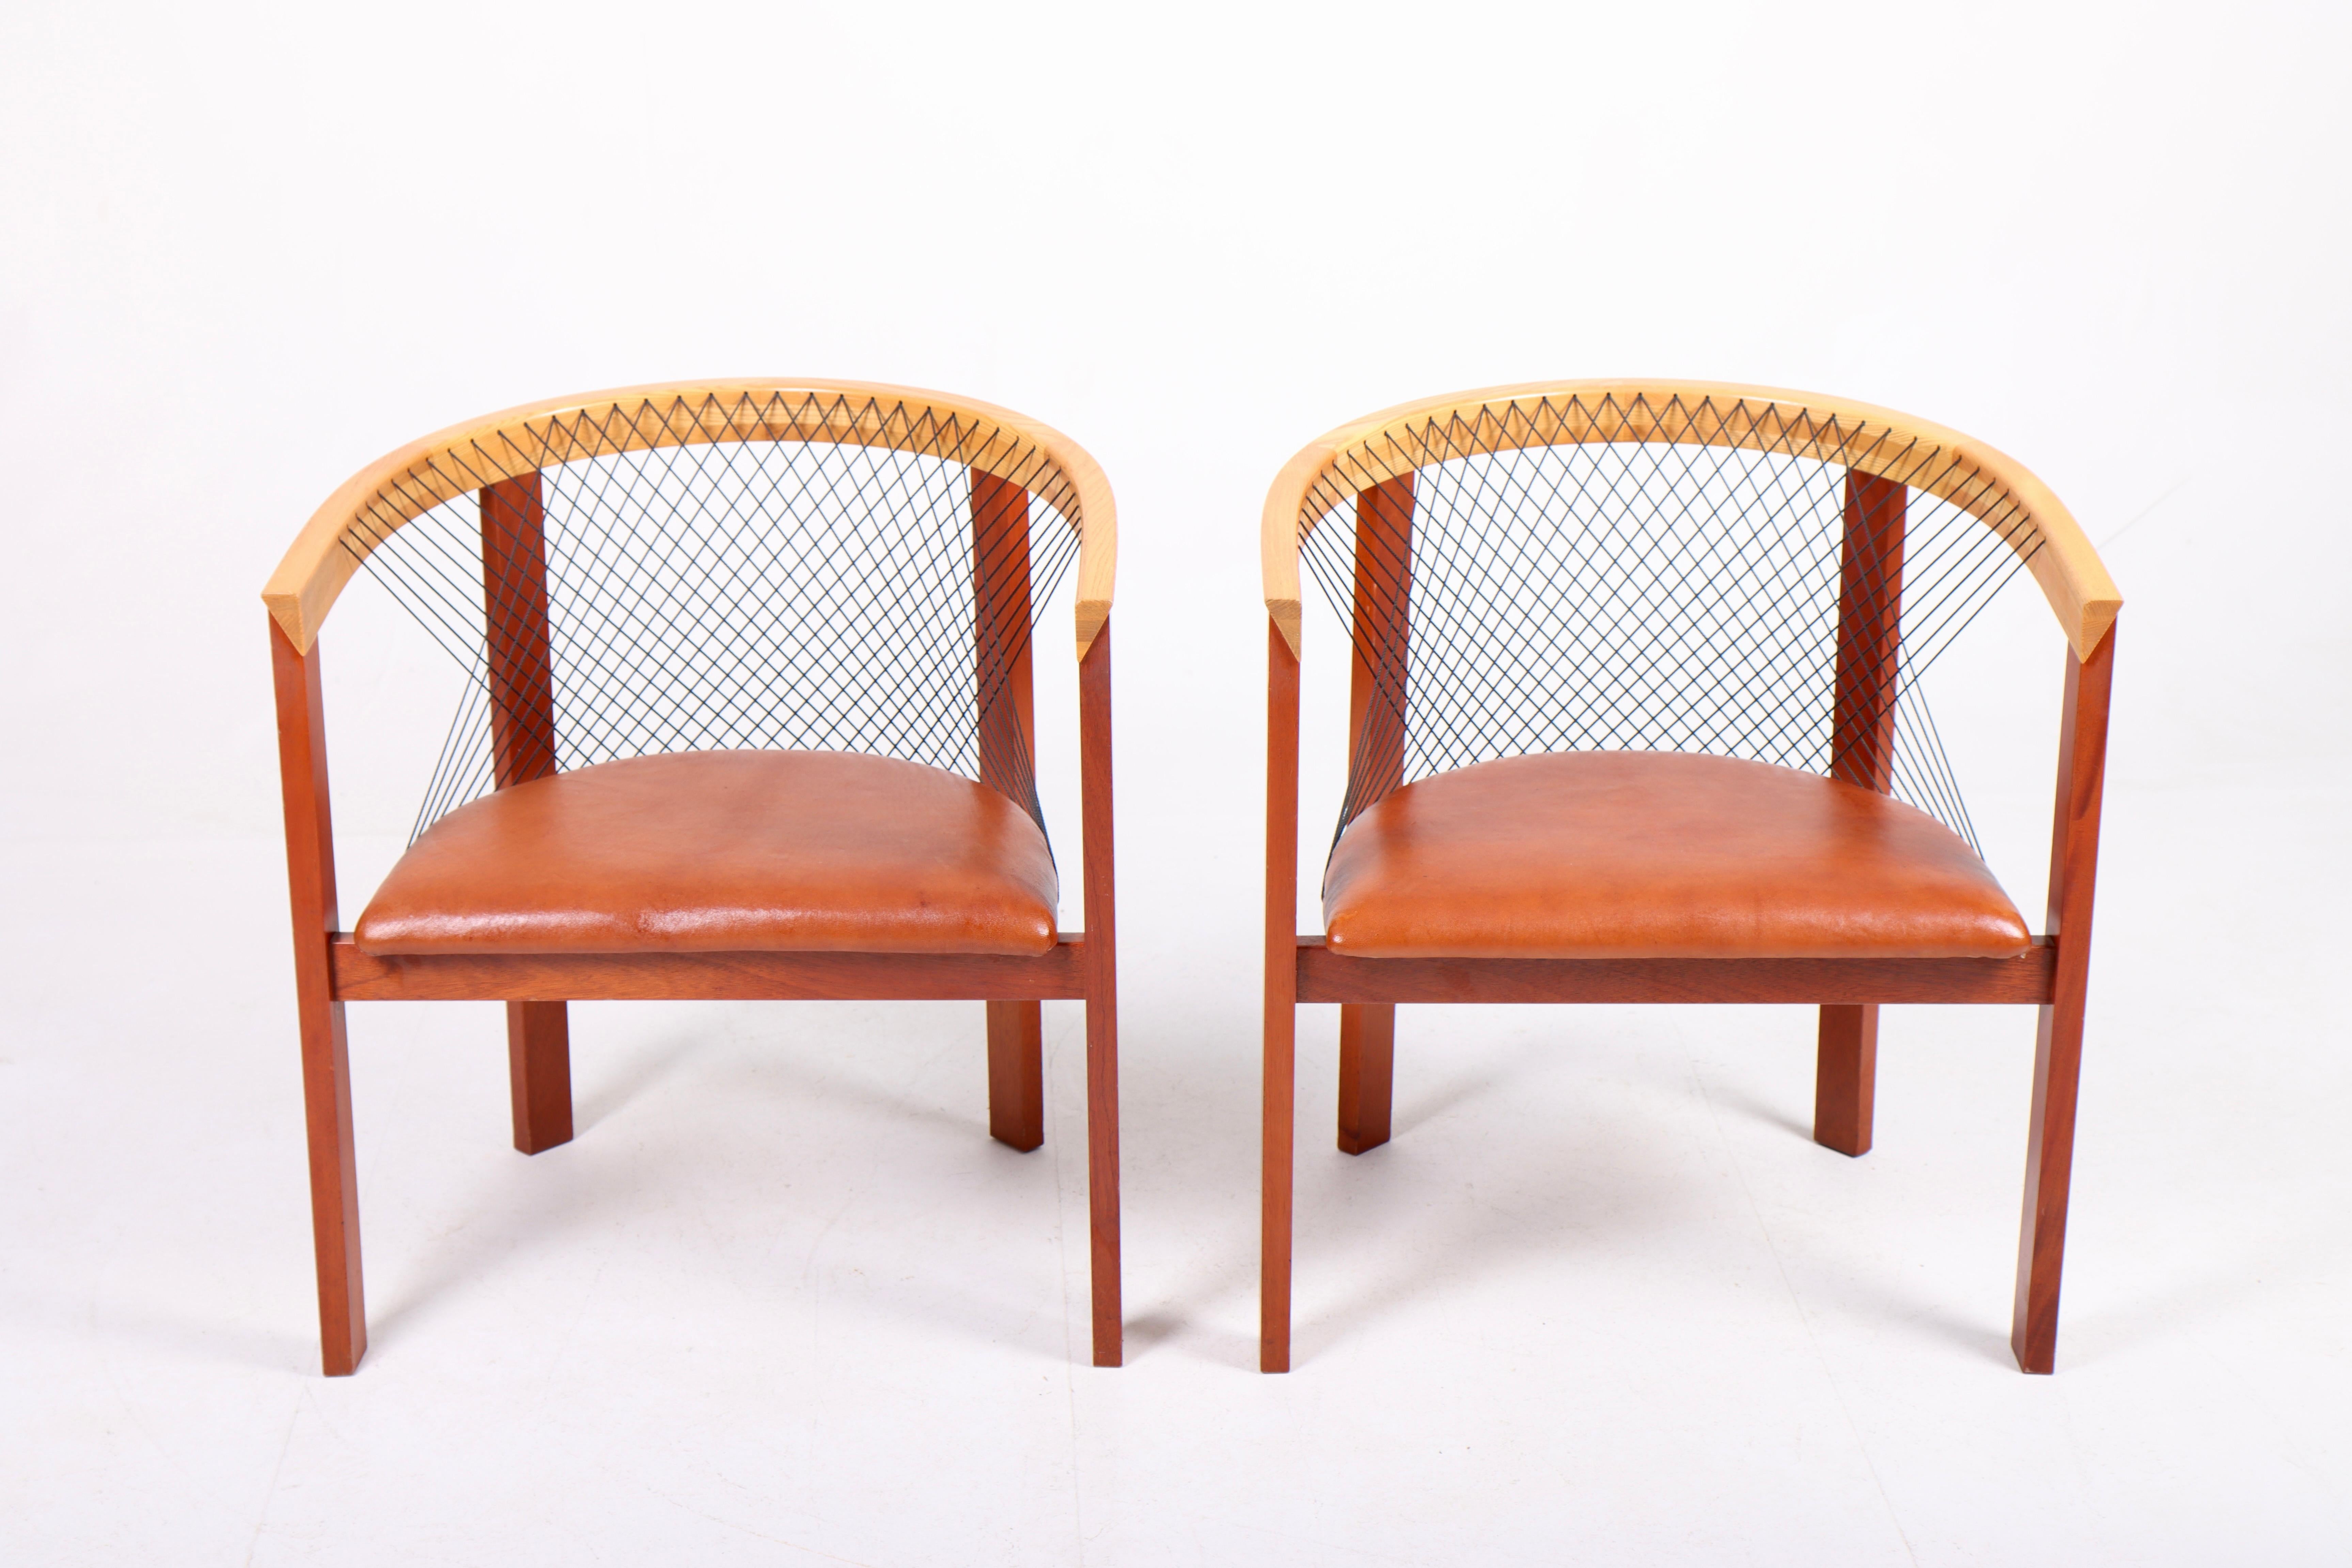 Pair of lounge chairs in a rare combination of elm and mahogni. Designed by Danish architect Niels Jørgen Haugesen.